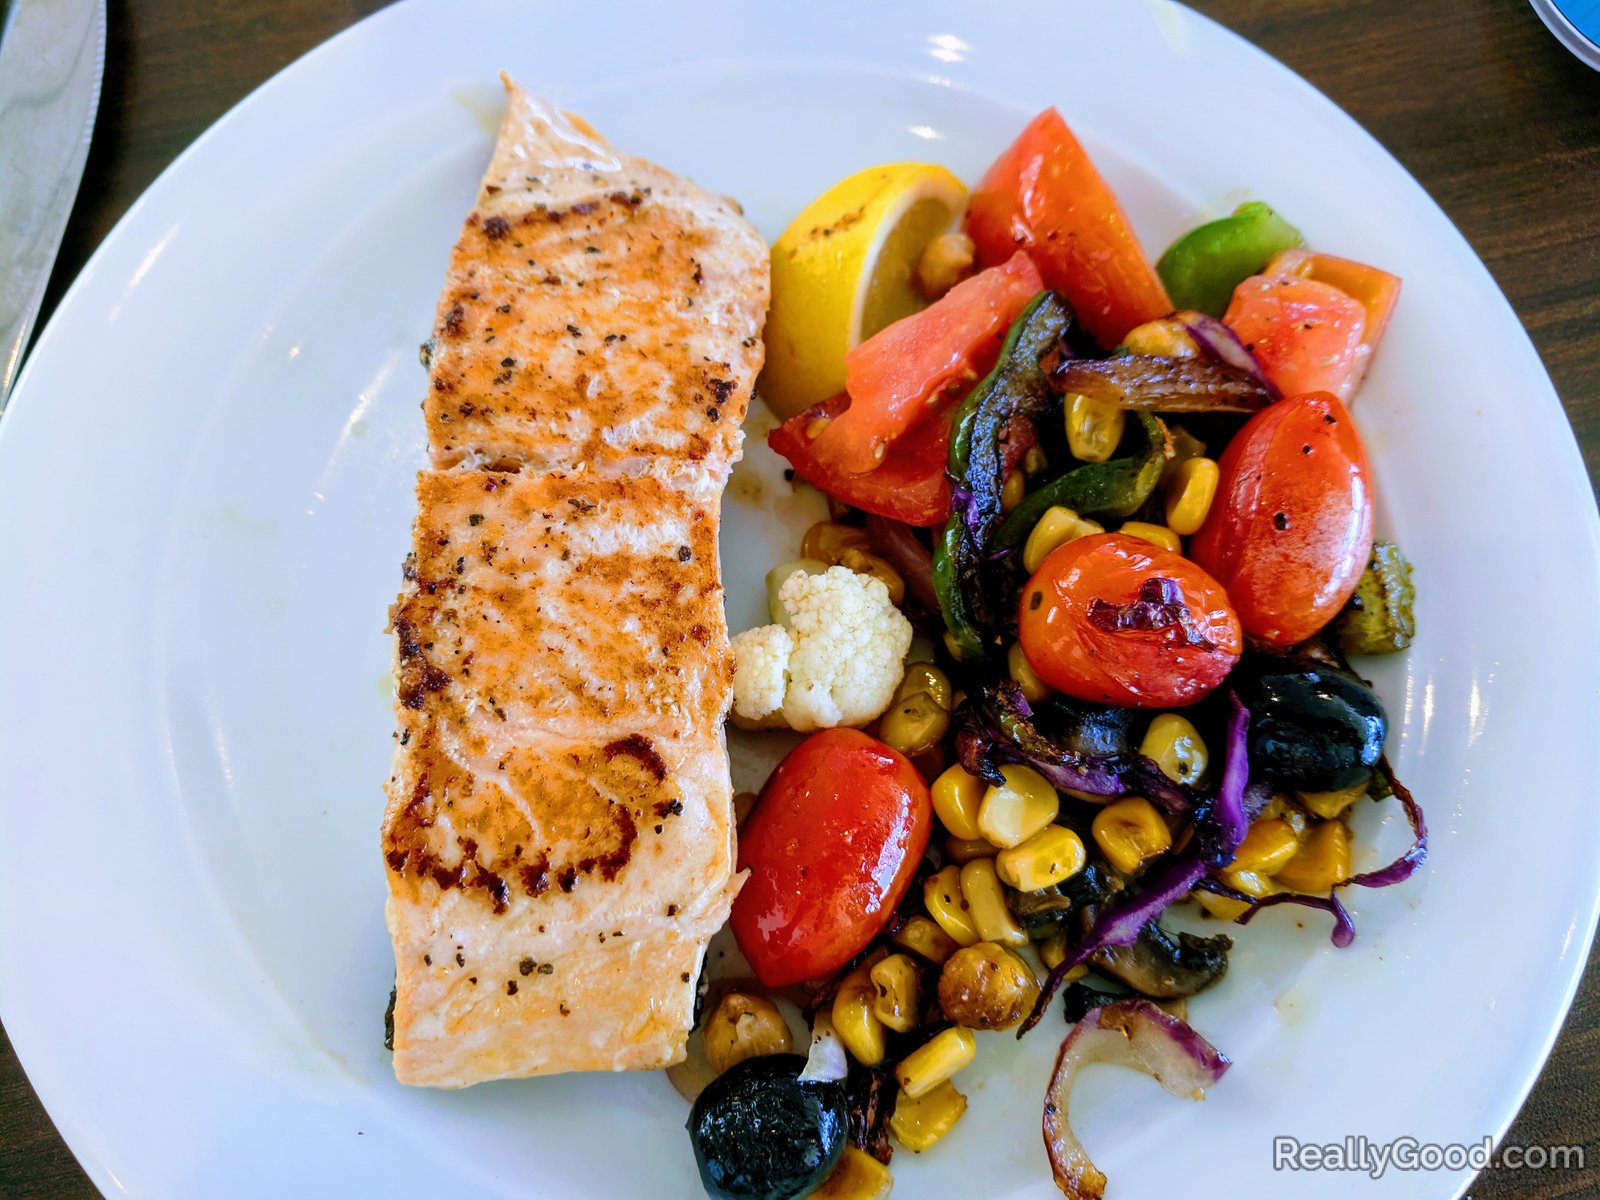 Broiled salmon and vegetables